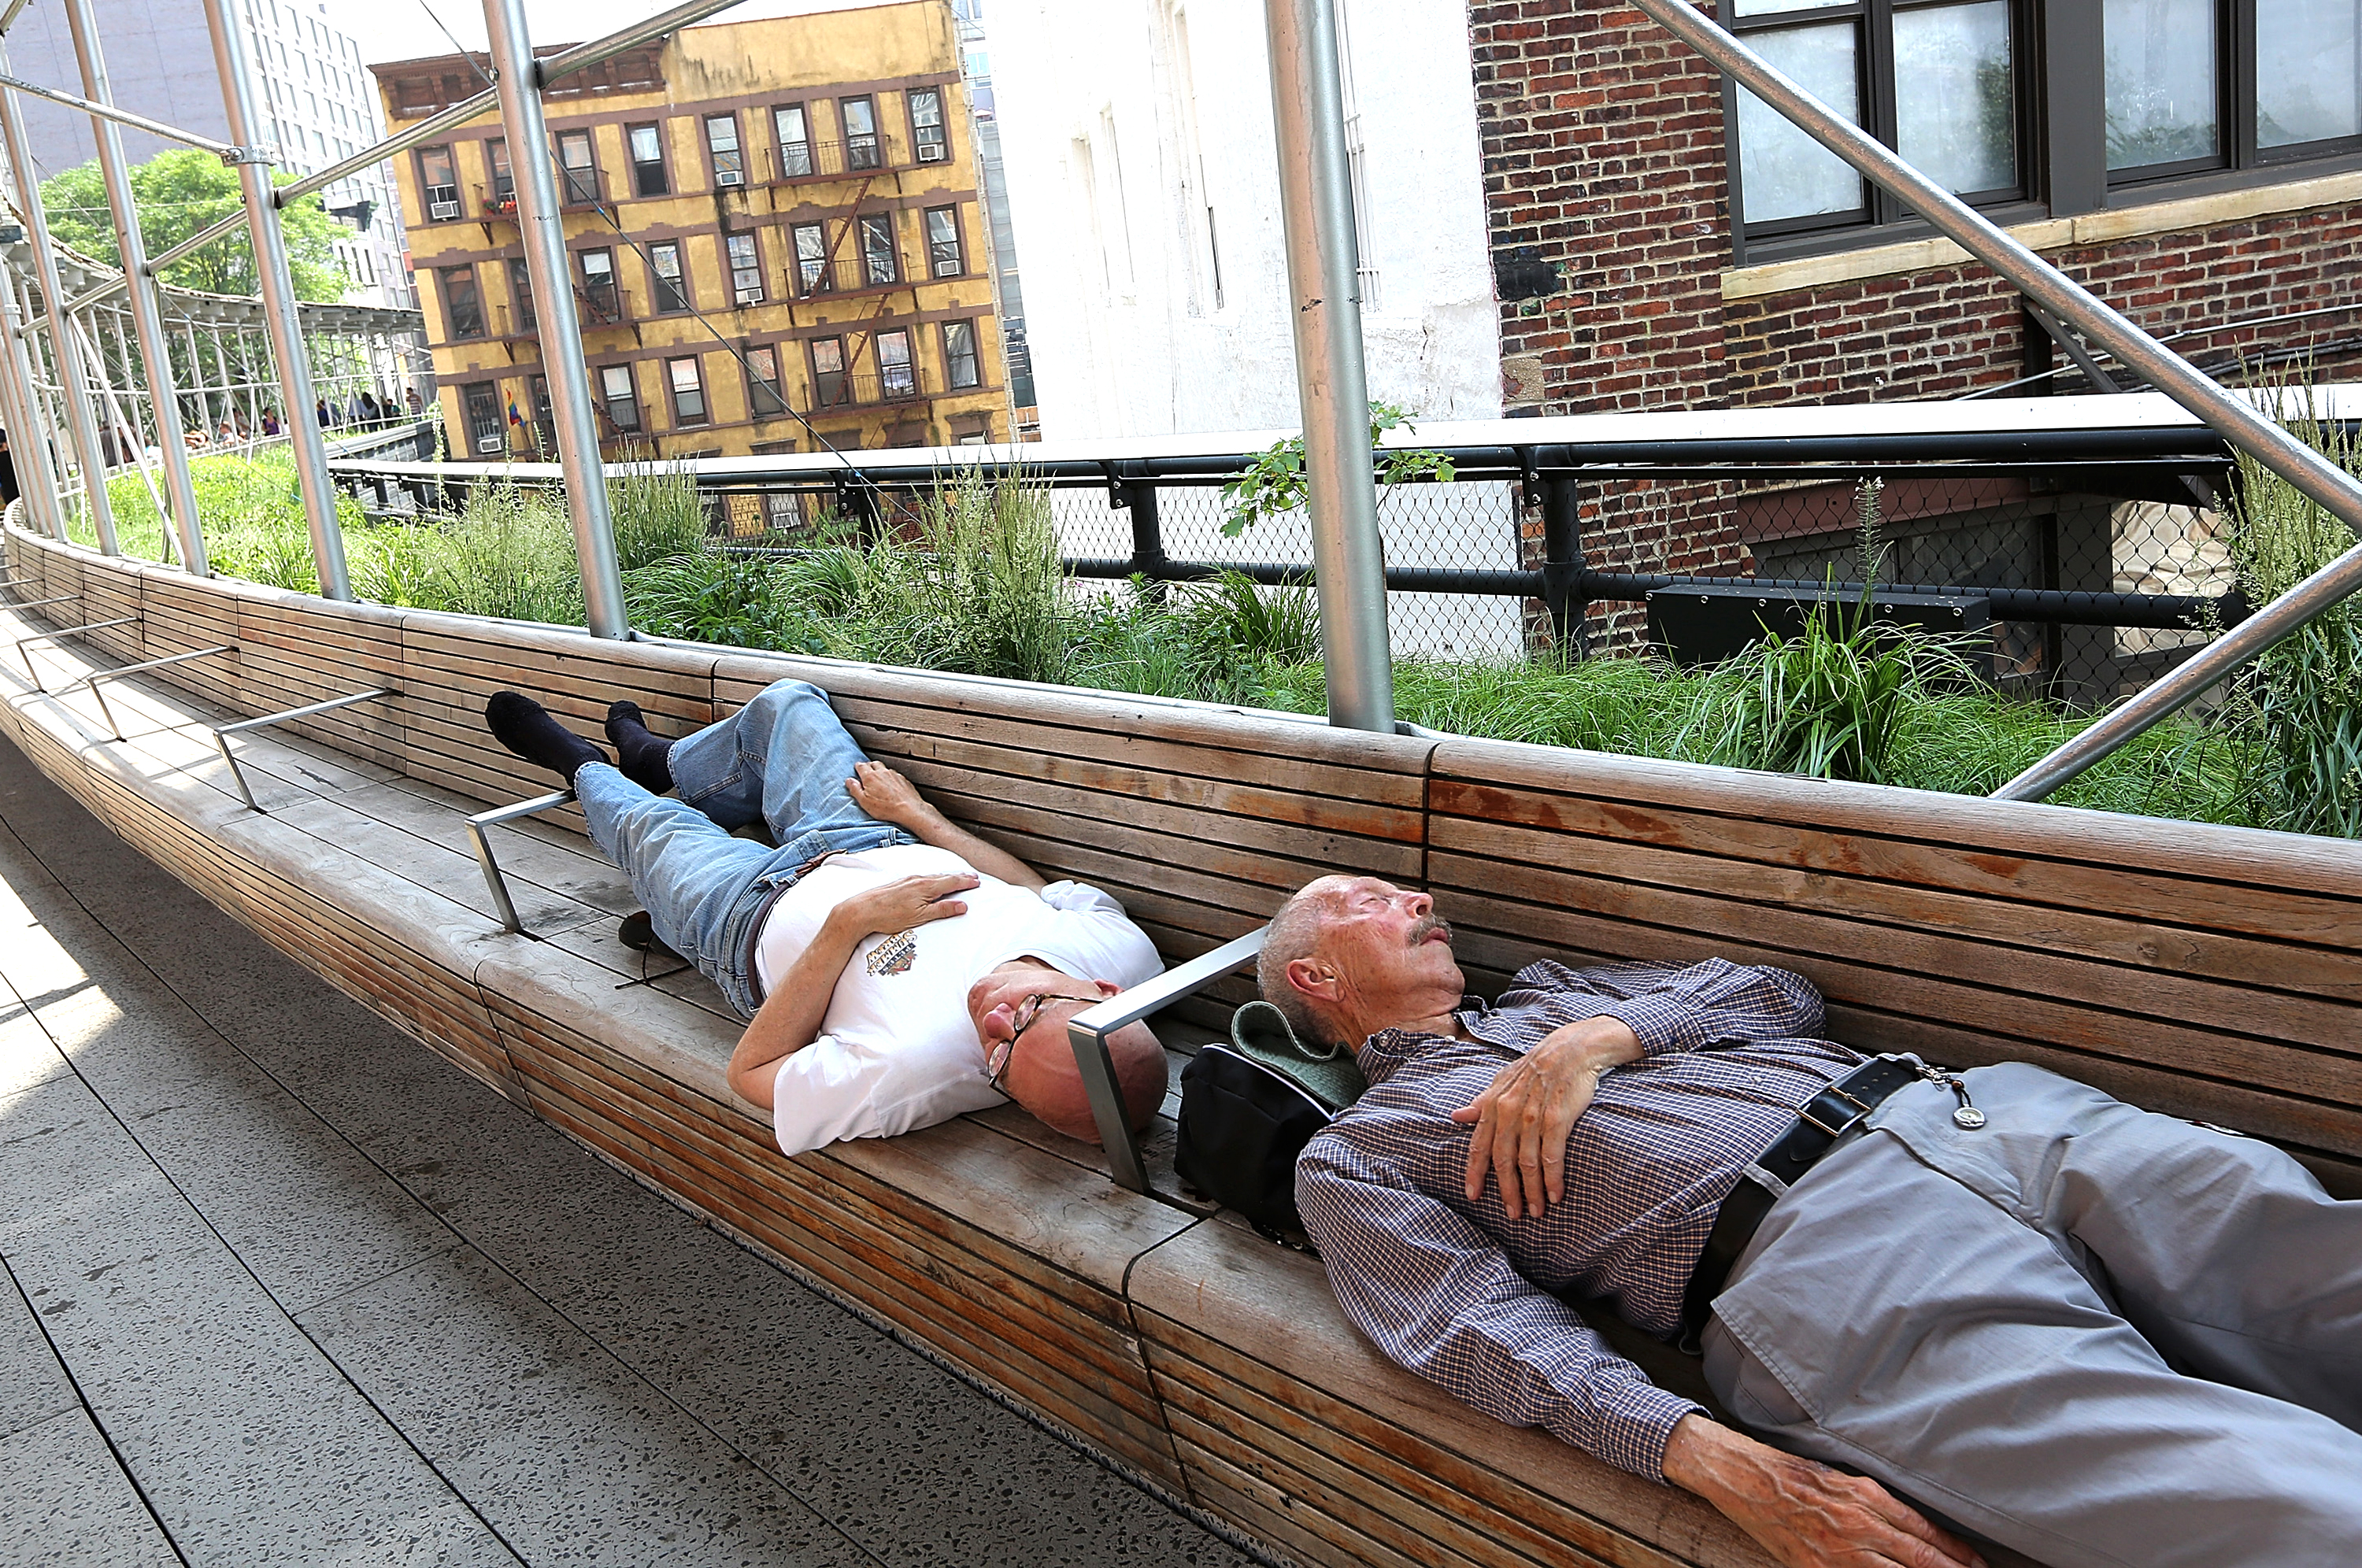 People sleep in the shade in Manhattan's High Line Park on June 25, 2013 in New York City. Photographer: Mario Tama/Getty Images